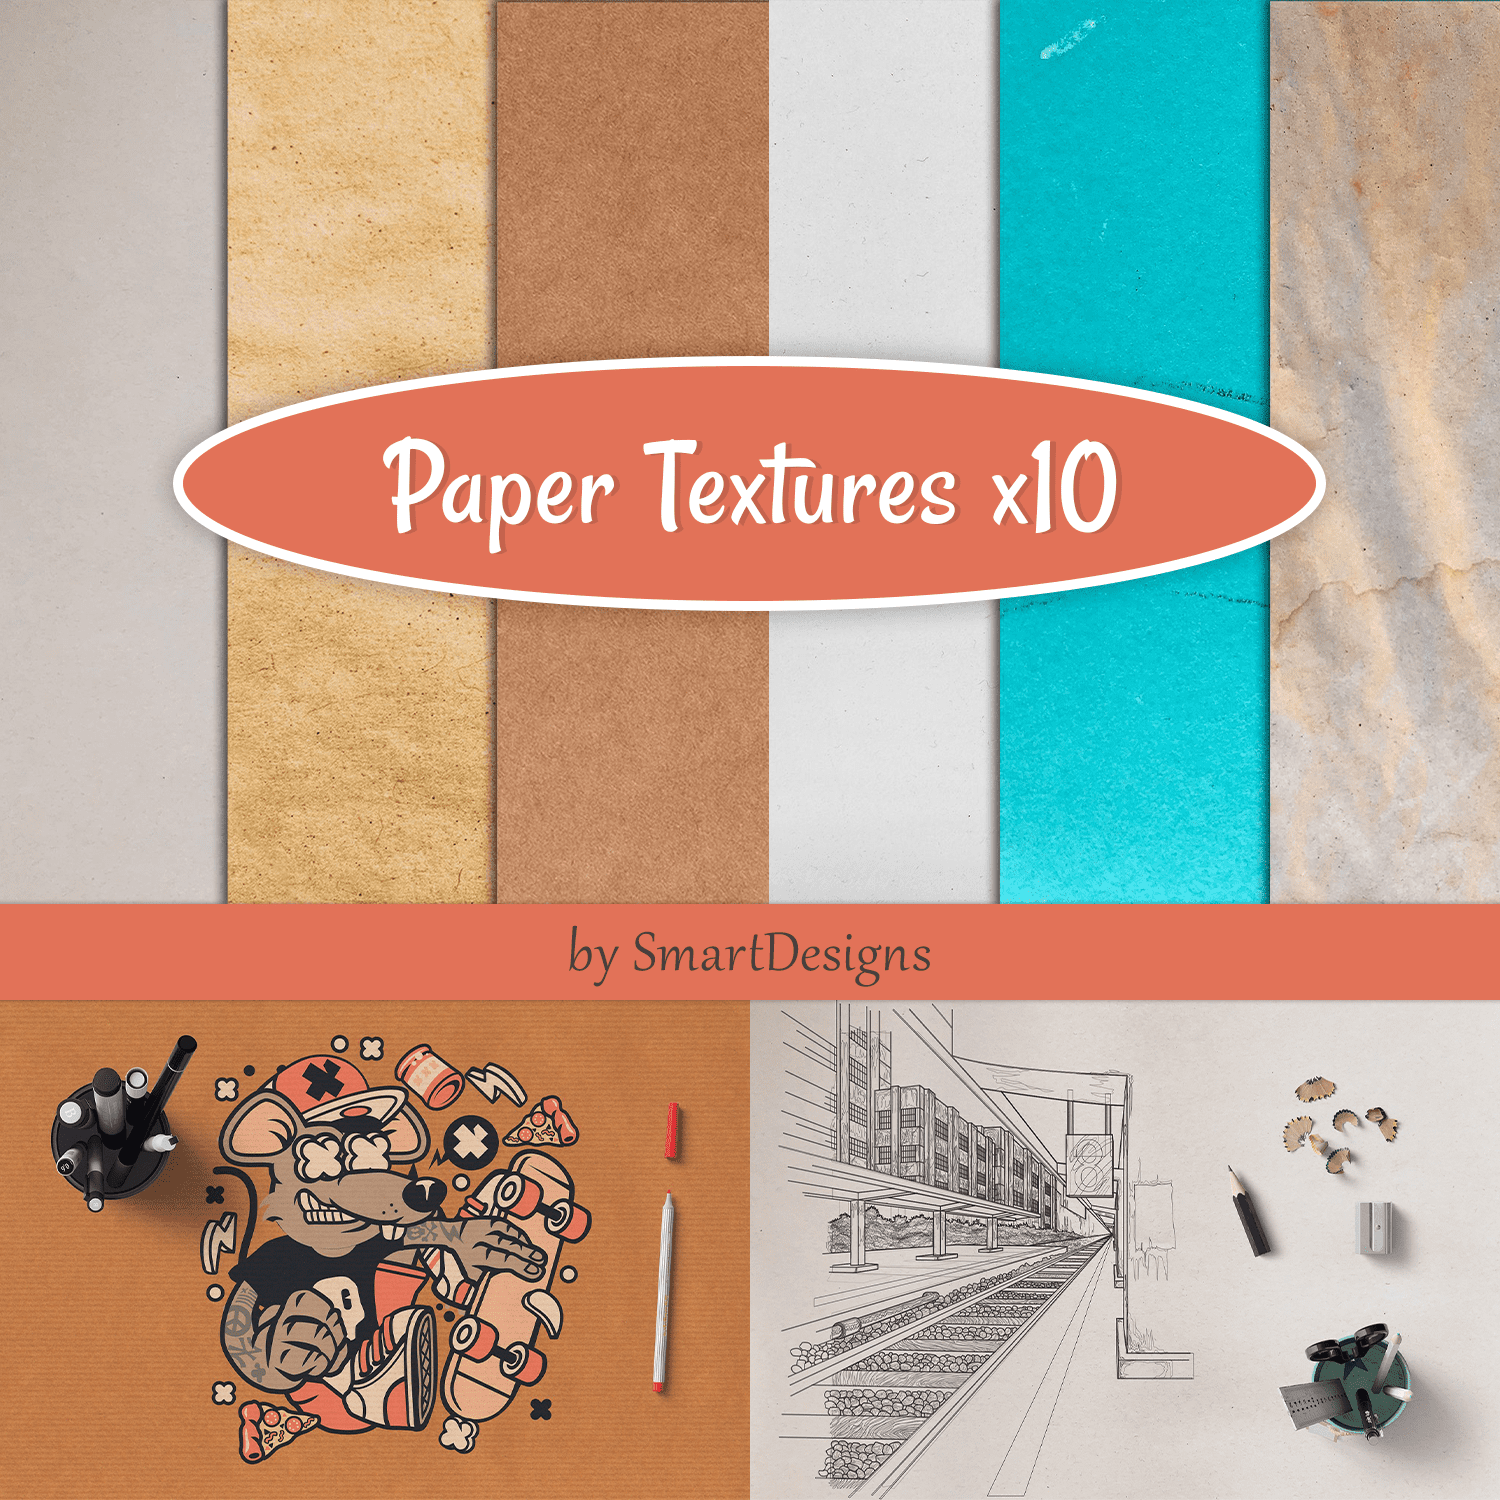 Preview paper textures.